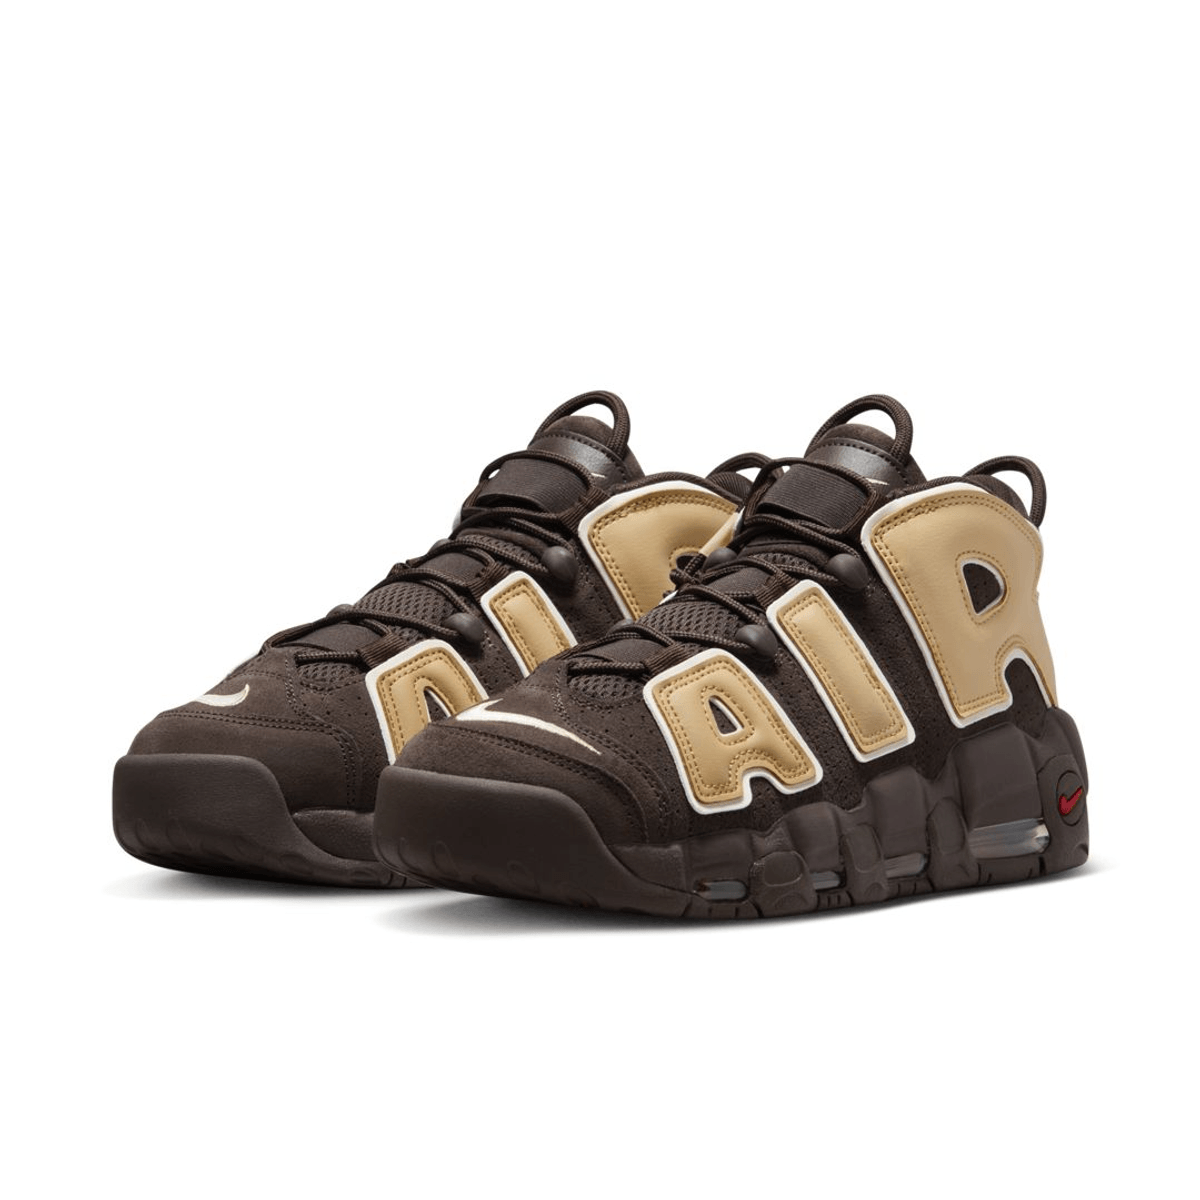 The Nike Air More Uptempo Baroque Brown Is Releasing Soon